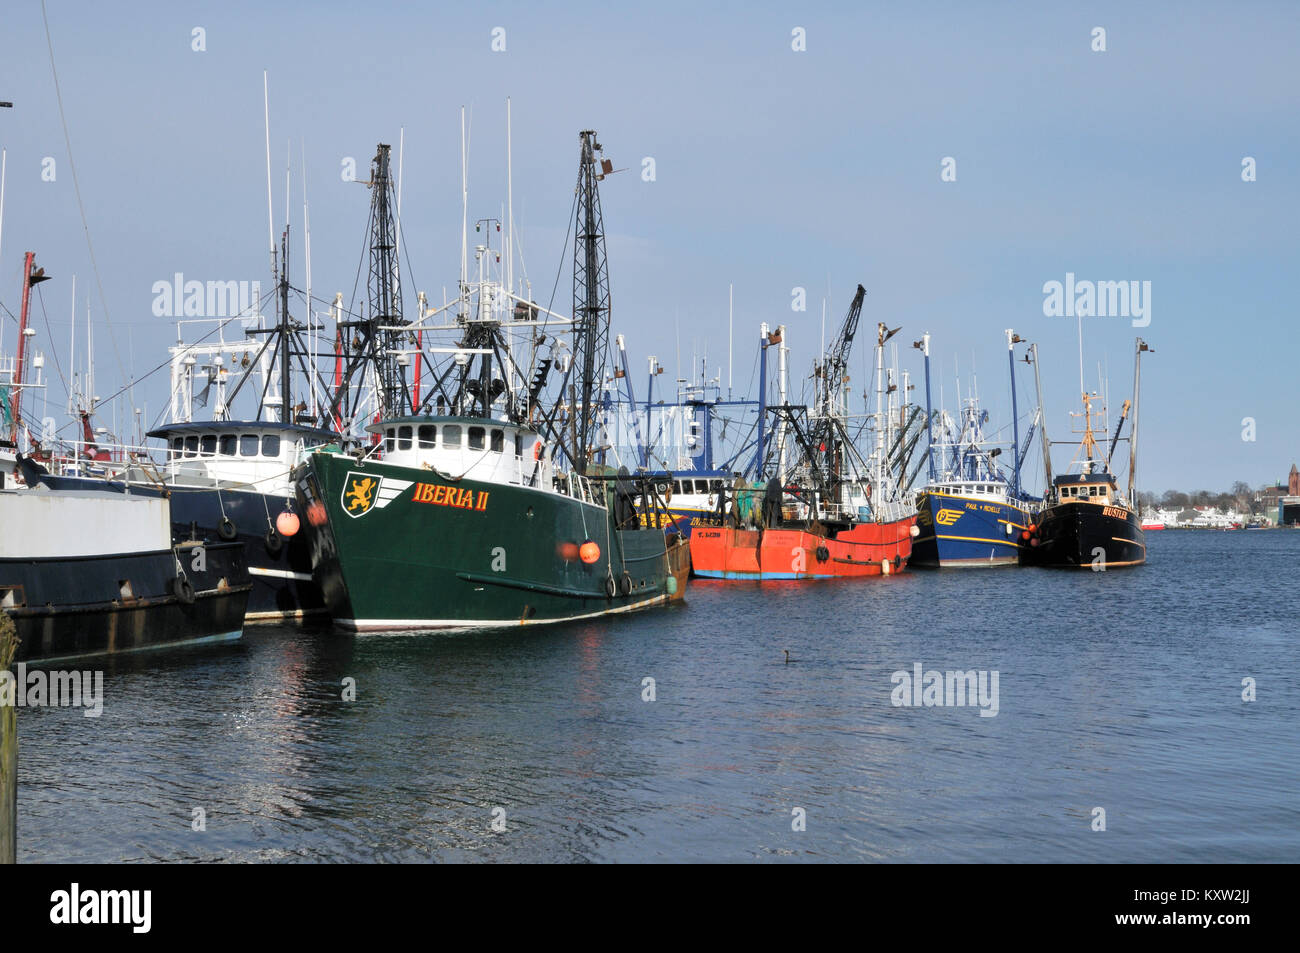 Fishing trawlers rafted along side each other at wharf in New Bedford harbor, New Bedford, Massachusetts the world's most famous whaling era seaport Stock Photo